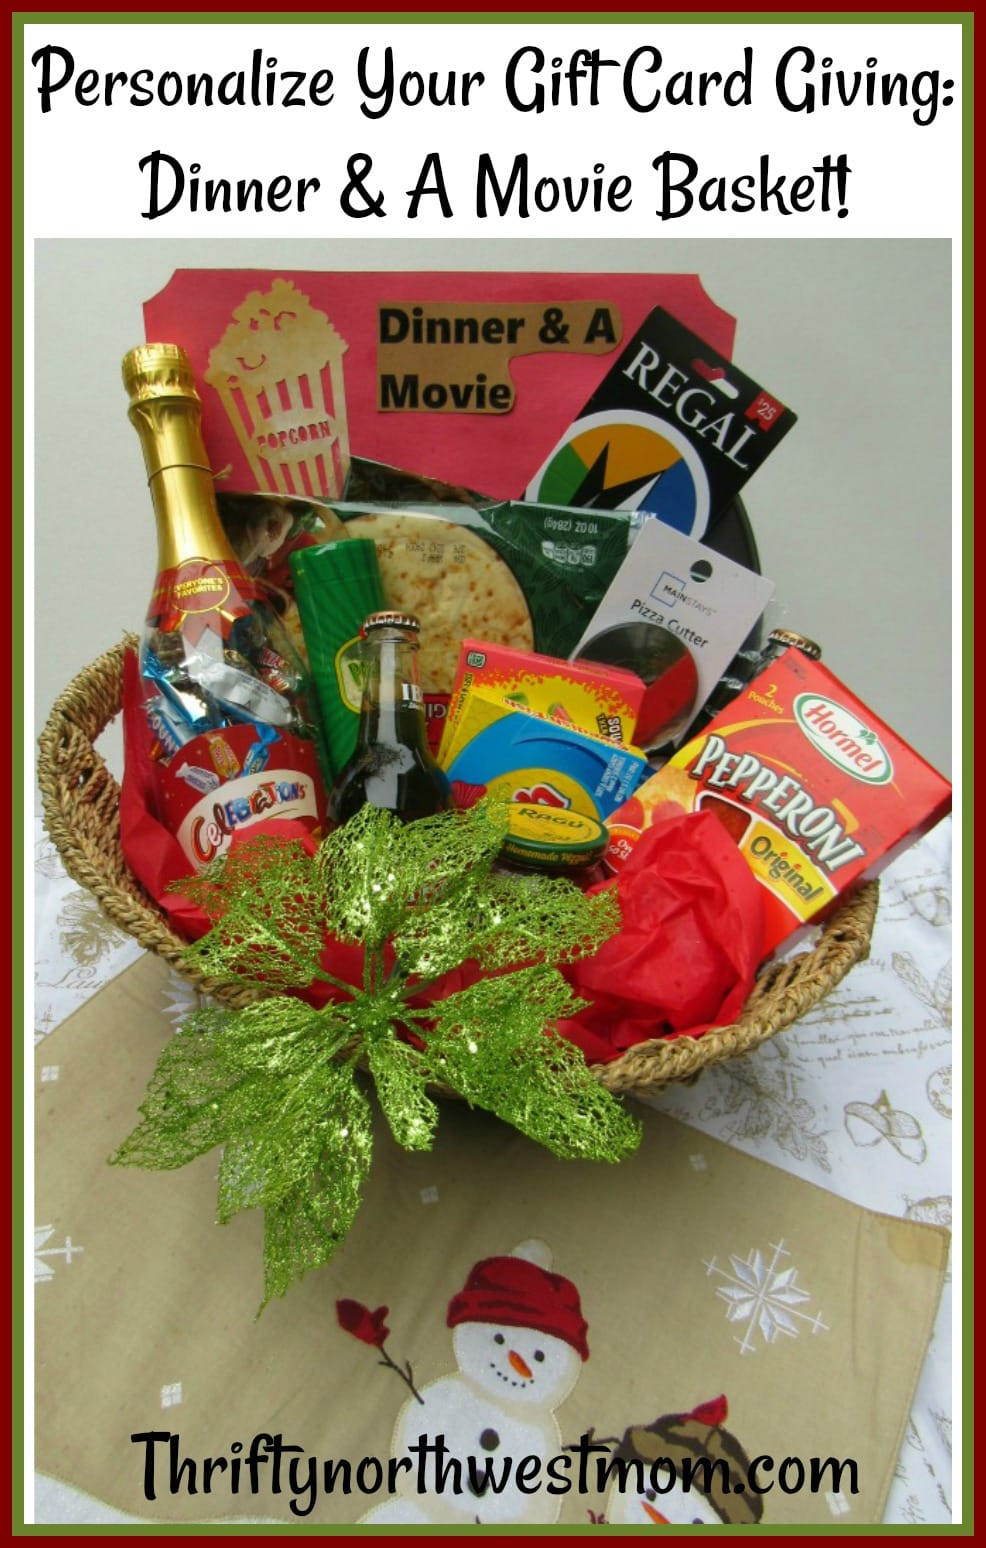 Gift Card Ideas For Couples
 Dinner & A Movie Gift Basket Idea How to Personalize